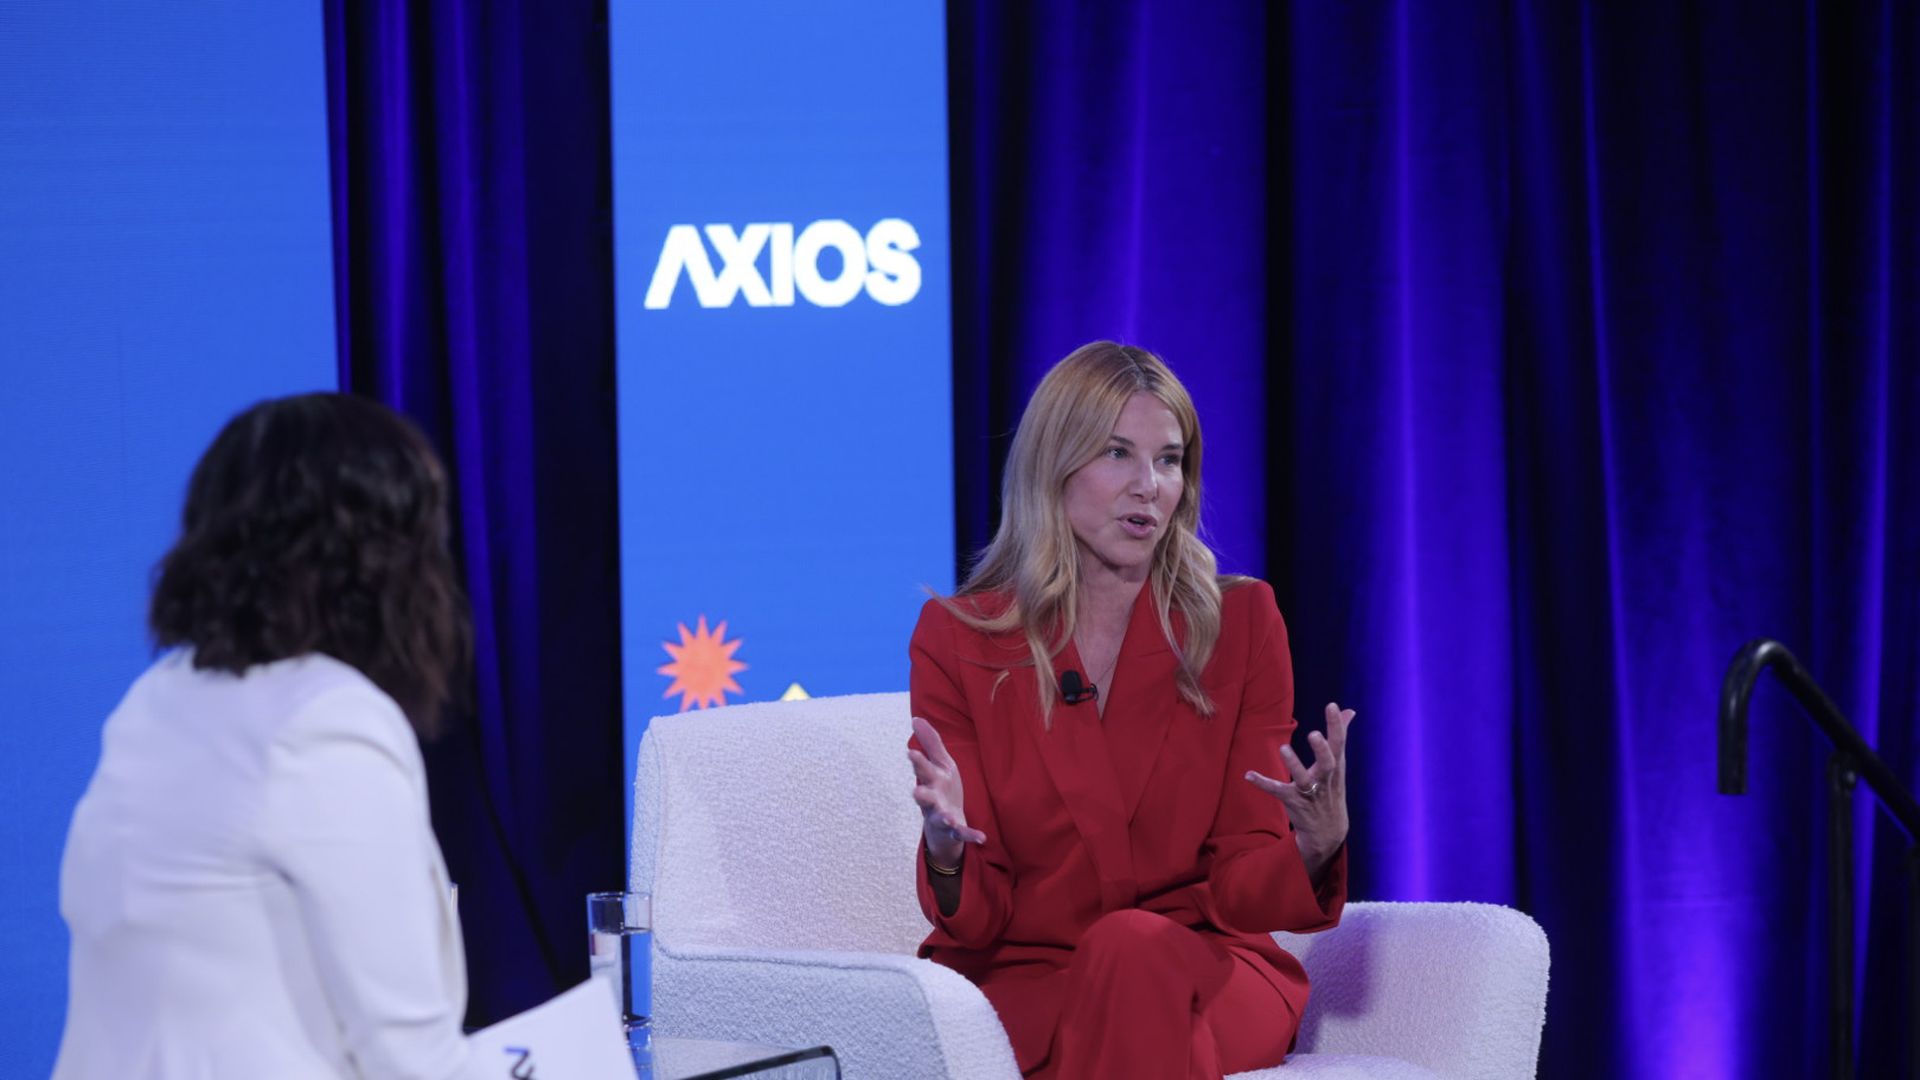 Slack CEO Denise Dresser speaks at Axios's What's Next Summit 